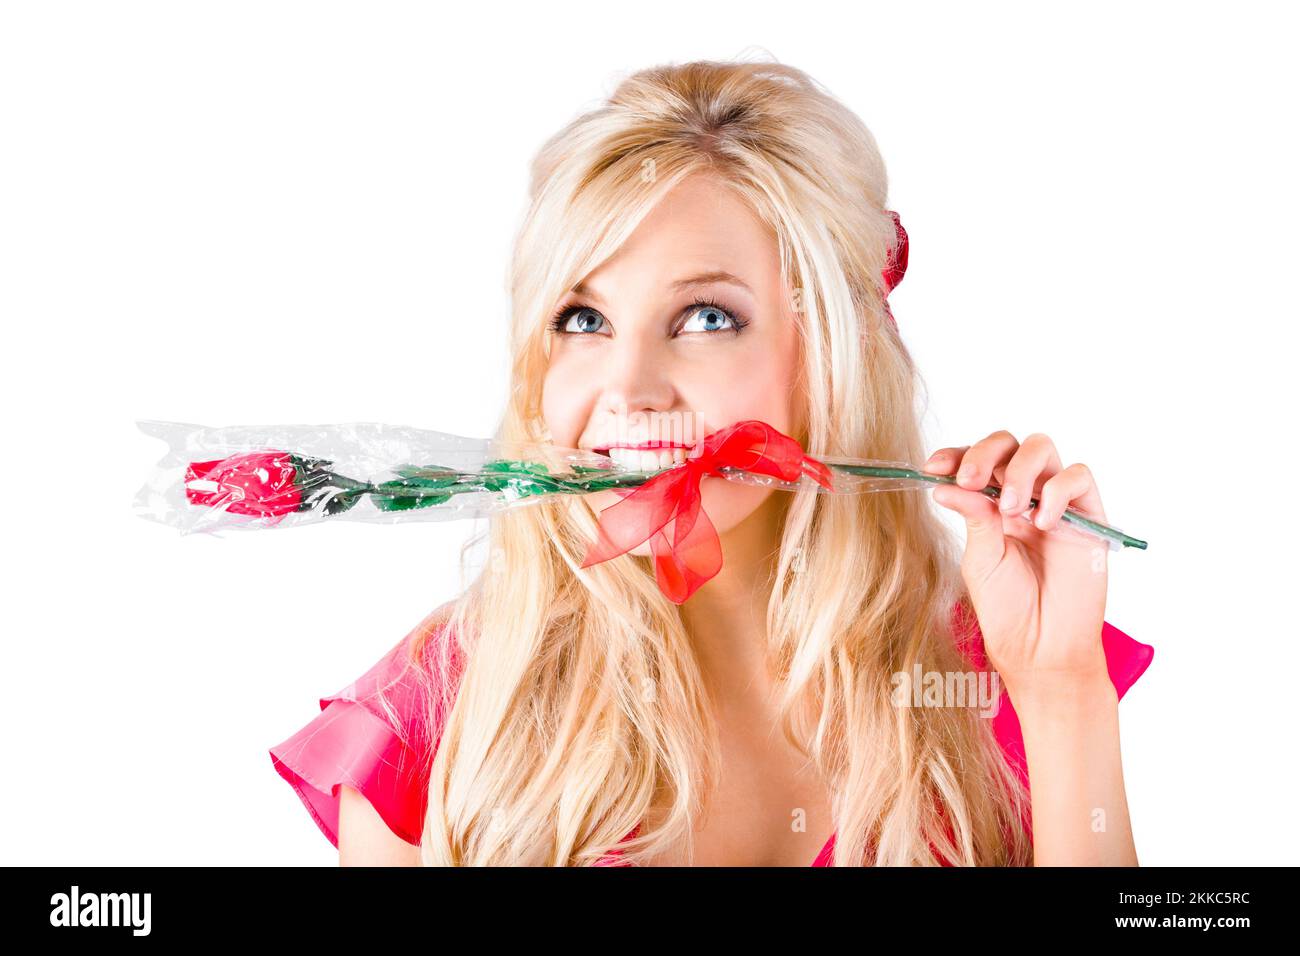 Geeky Hipster Holding Rose Between Teeth Stock Photo 207790537